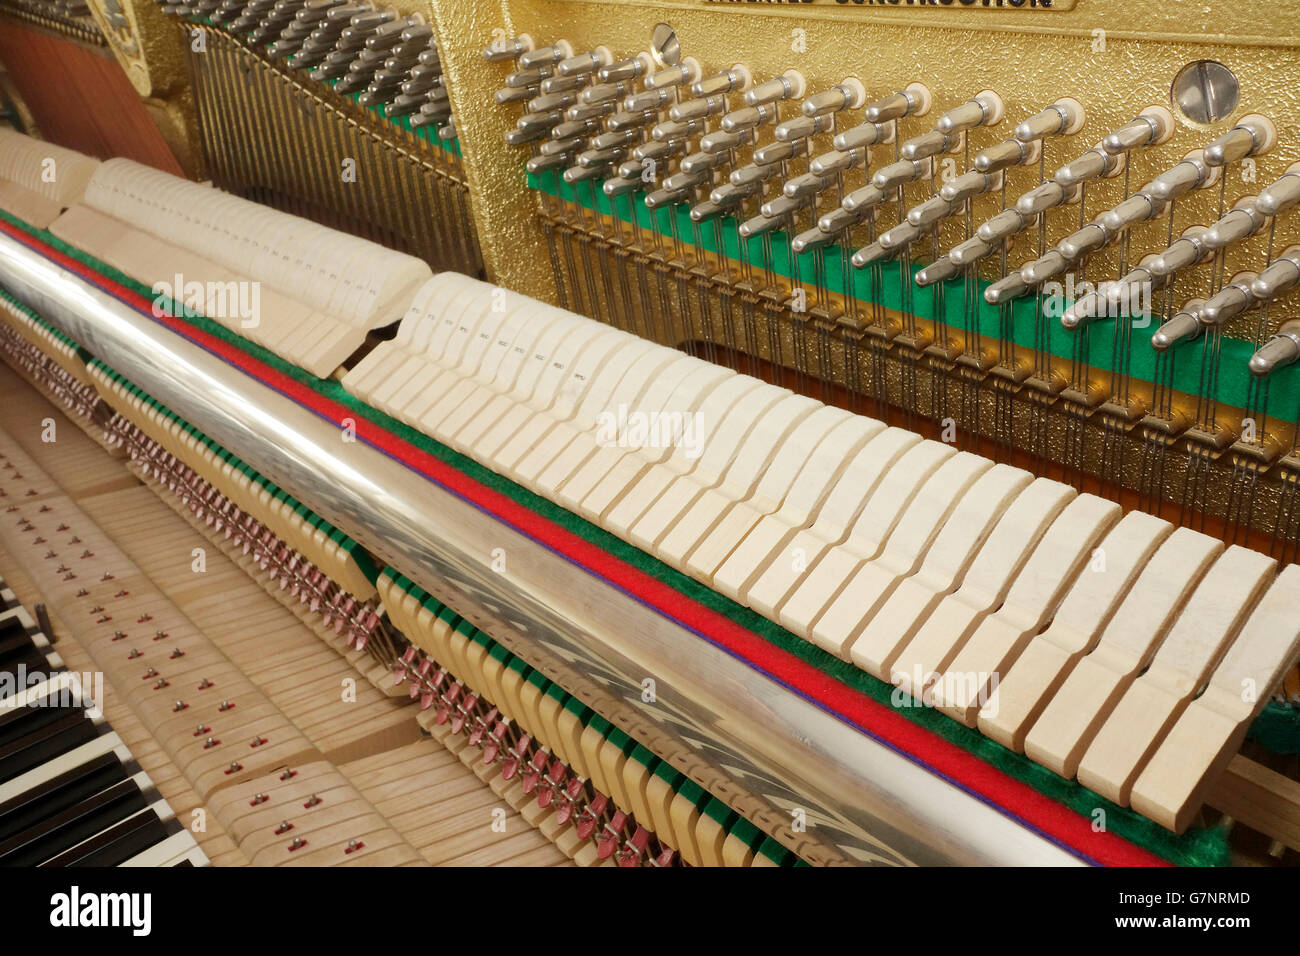 Diagonal view of an upright piano action mechanism. Keyboard, hammer rail, hammers and tuning pins on pin block are in view. Stock Photo